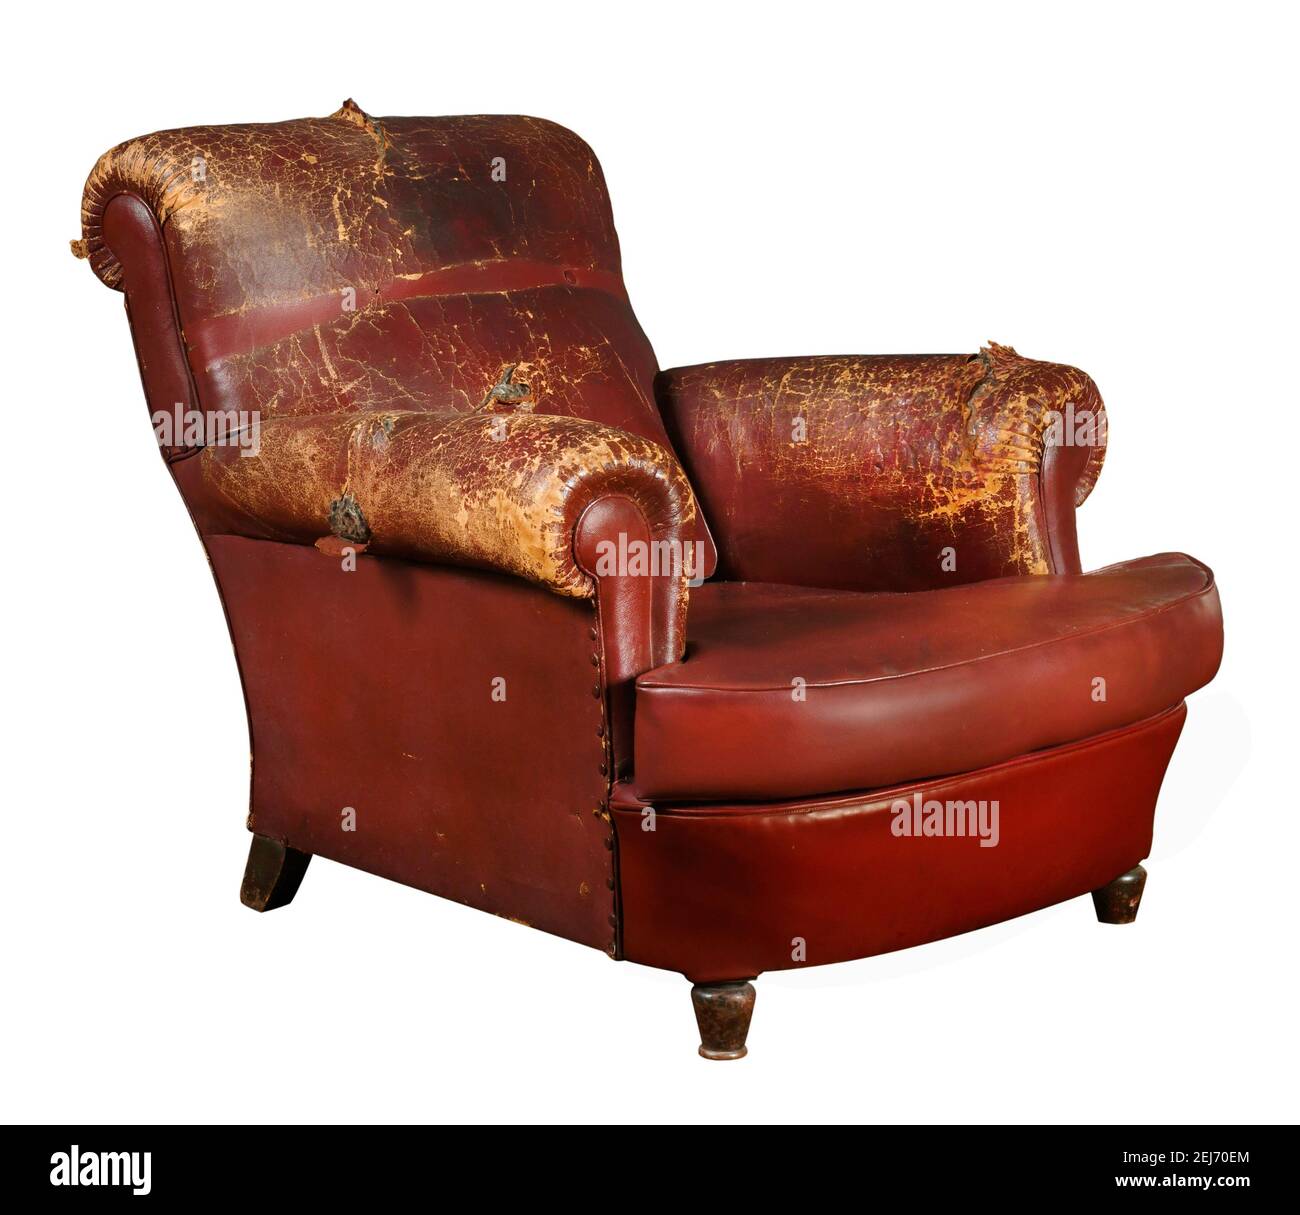 Aged red armchair with shabby leather armrests and back isolated on white background Stock Photo